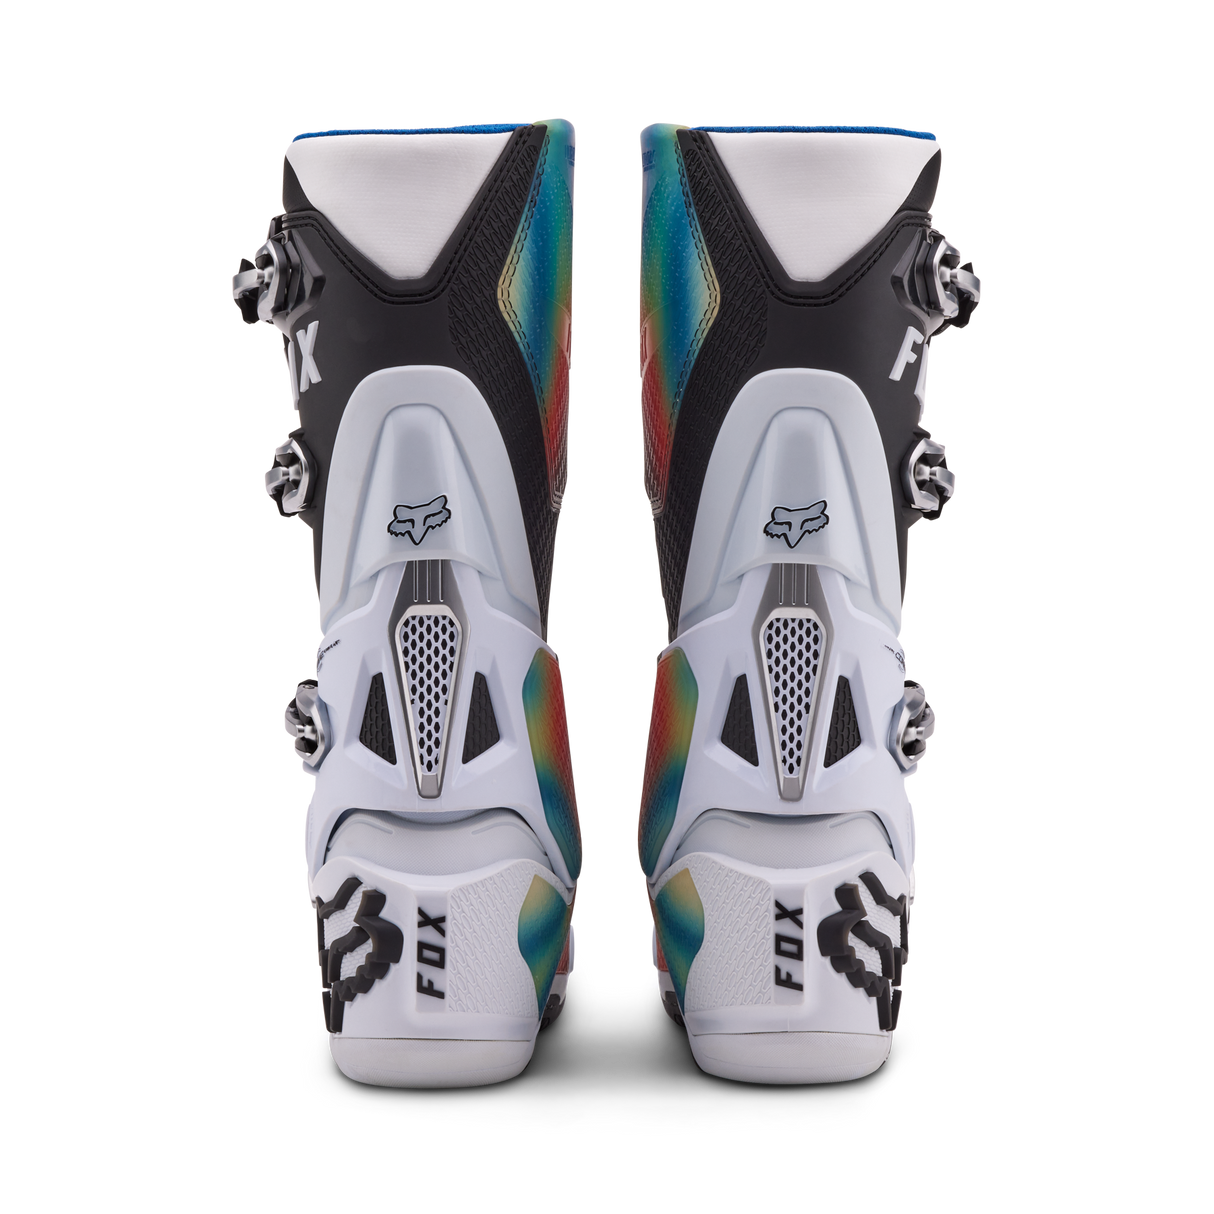 Fox Instinct Scans Limited Edition Boots White